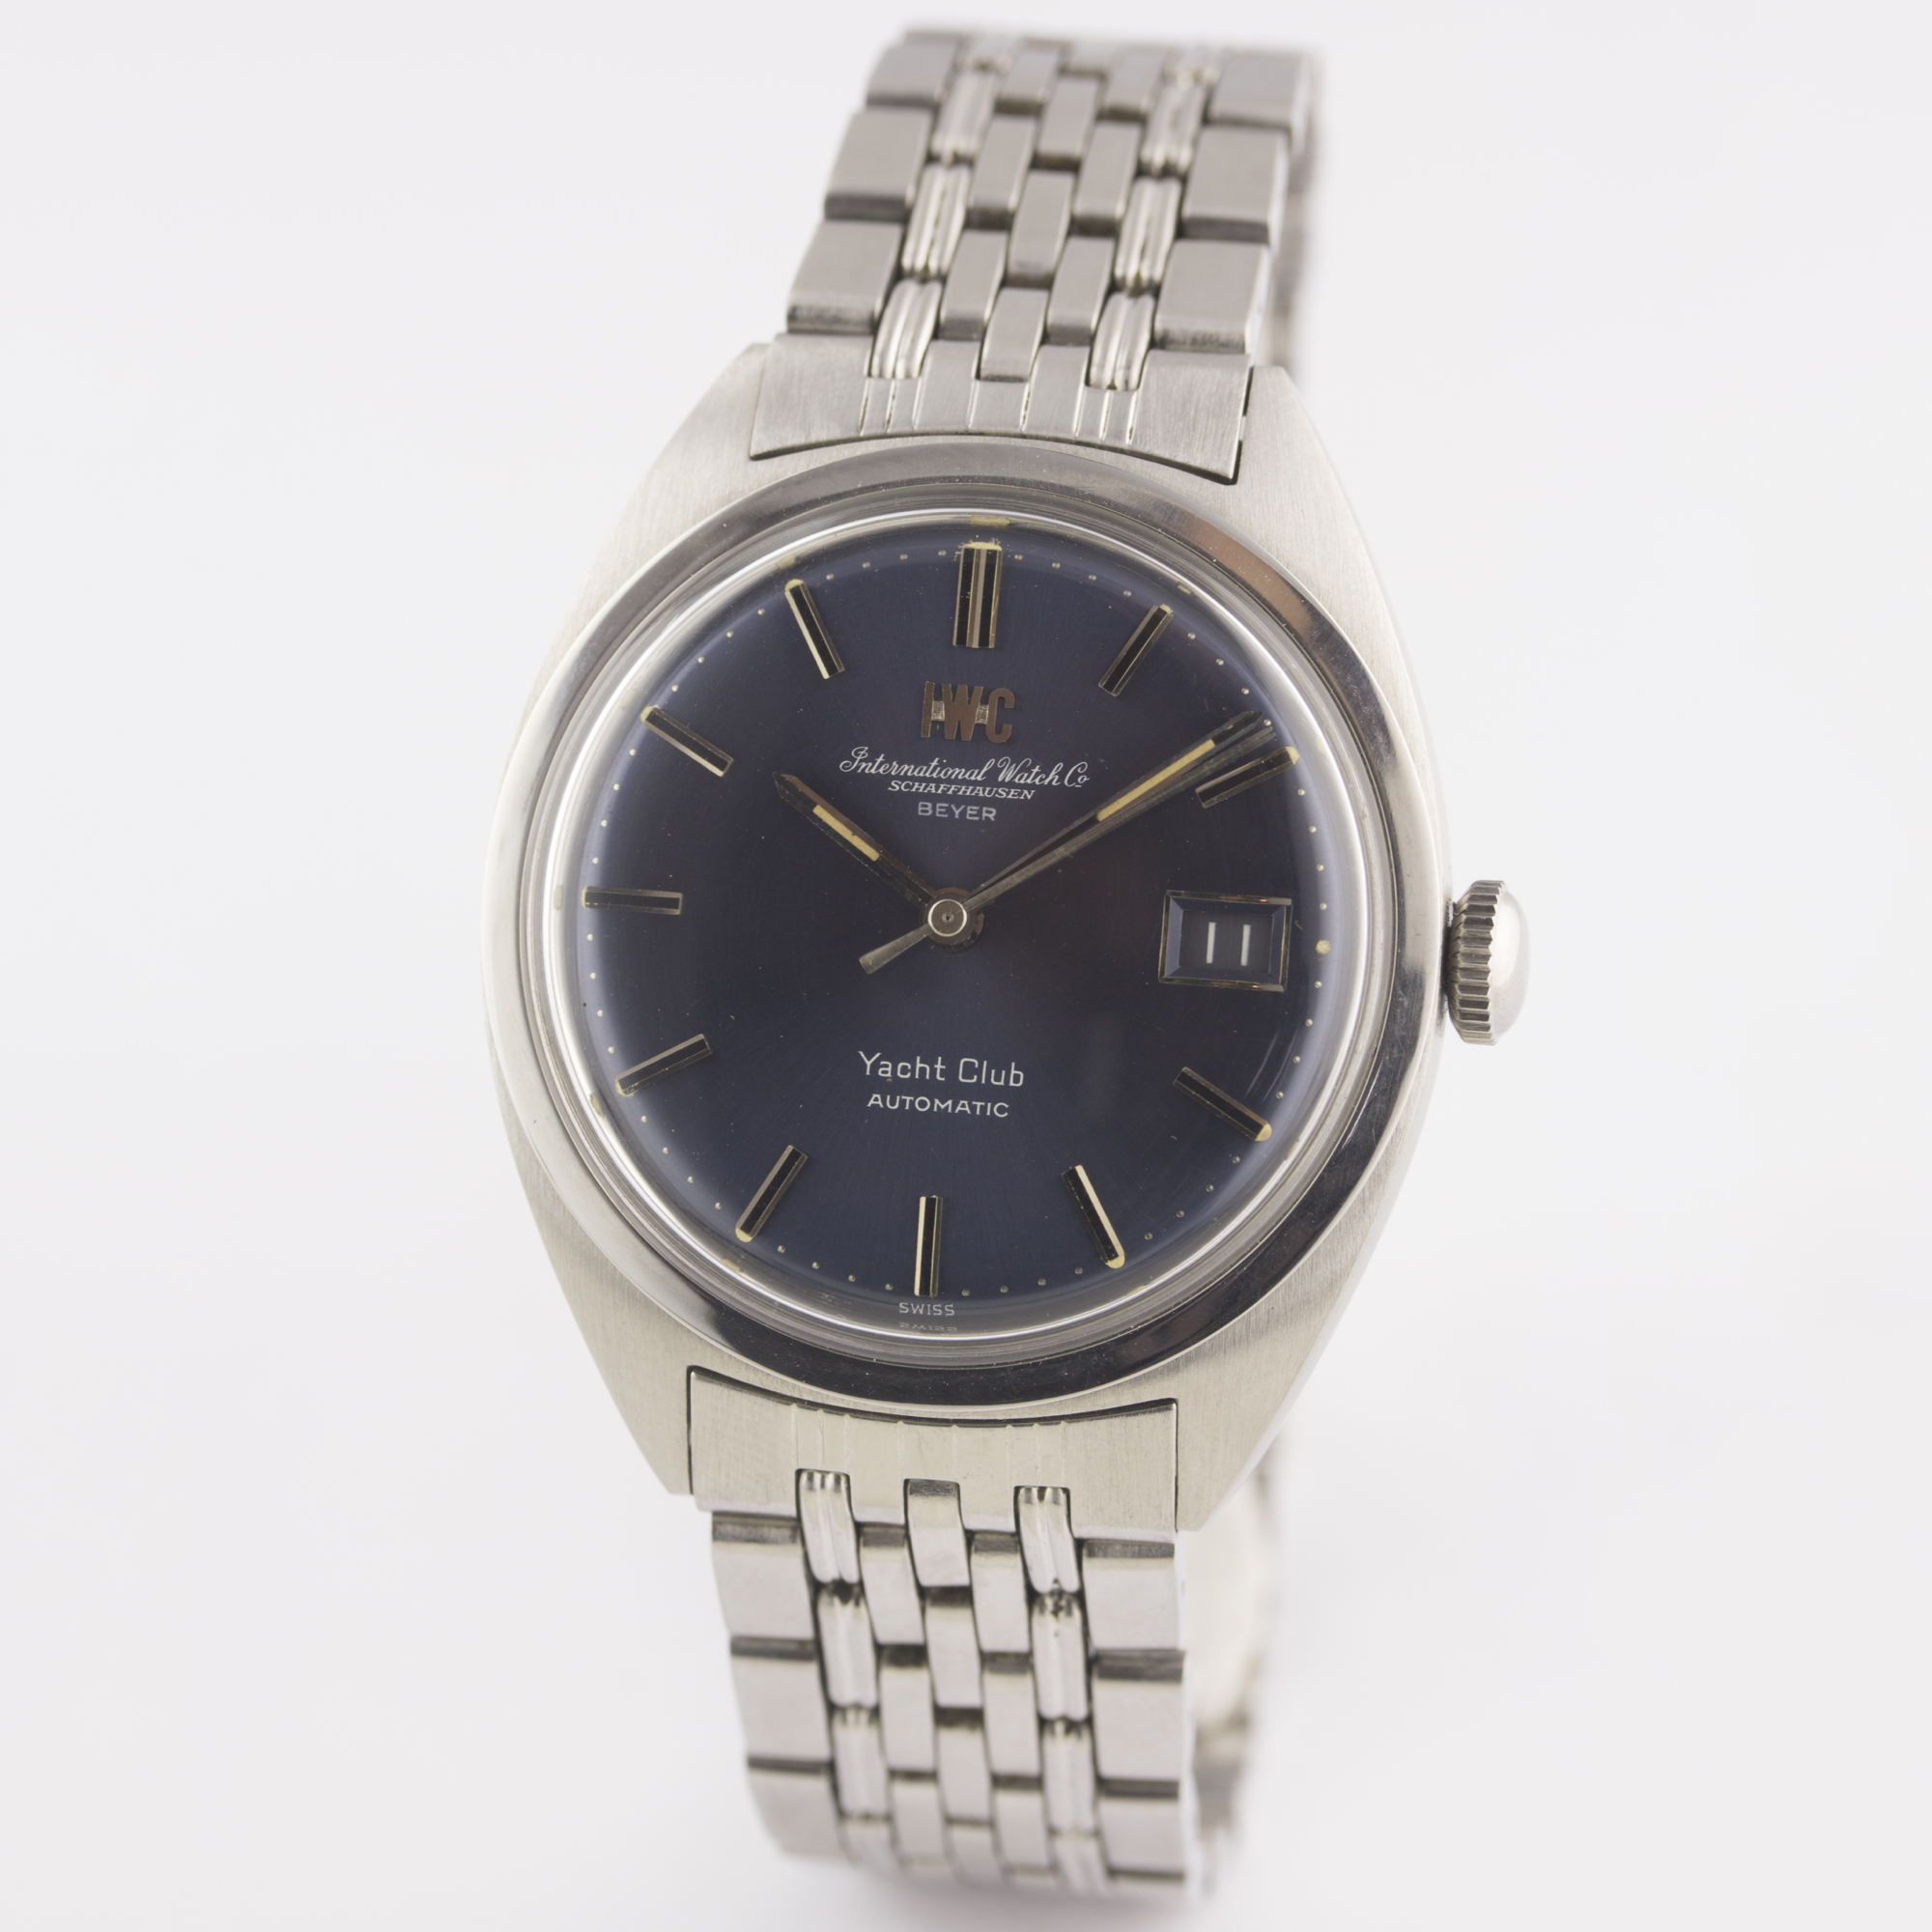 A RARE GENTLEMAN'S STAINLESS STEEL IWC YACHT CLUB AUTOMATIC BRACELET WATCH CIRCA 1971, REF. R811 - Image 2 of 11